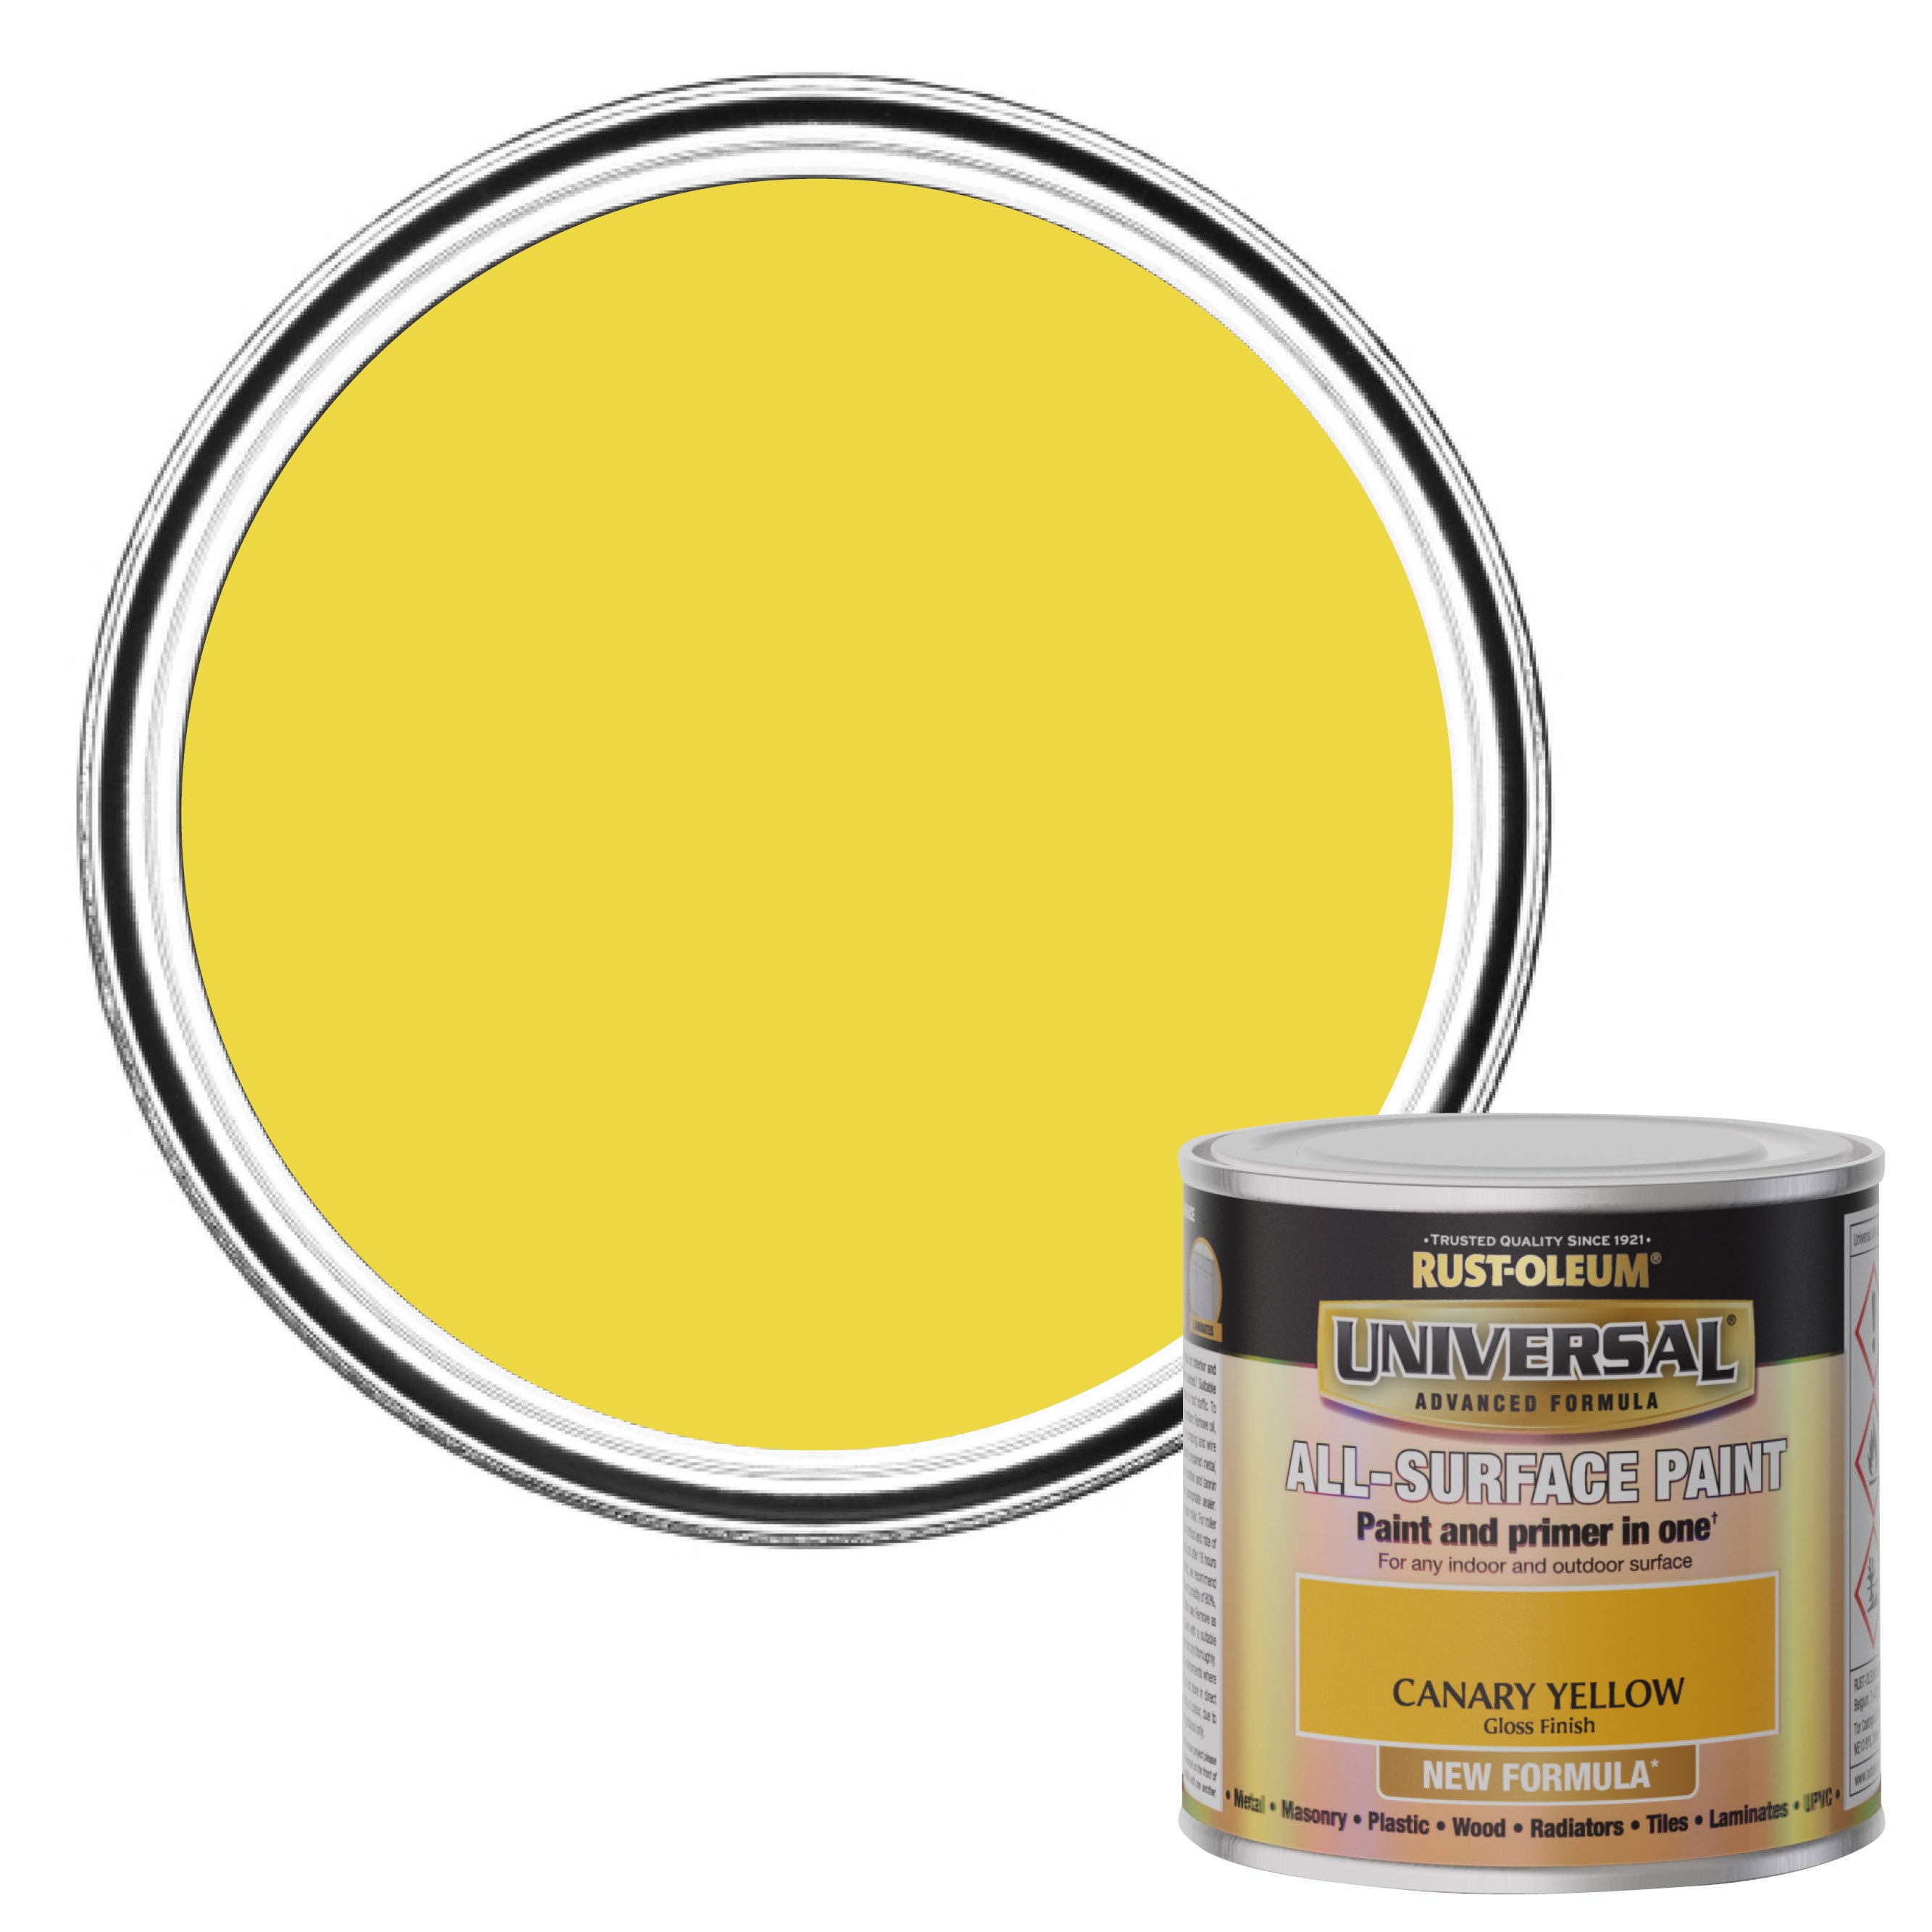 Rust-Oleum Canary Yellow Gloss Universal All-Surface Paint